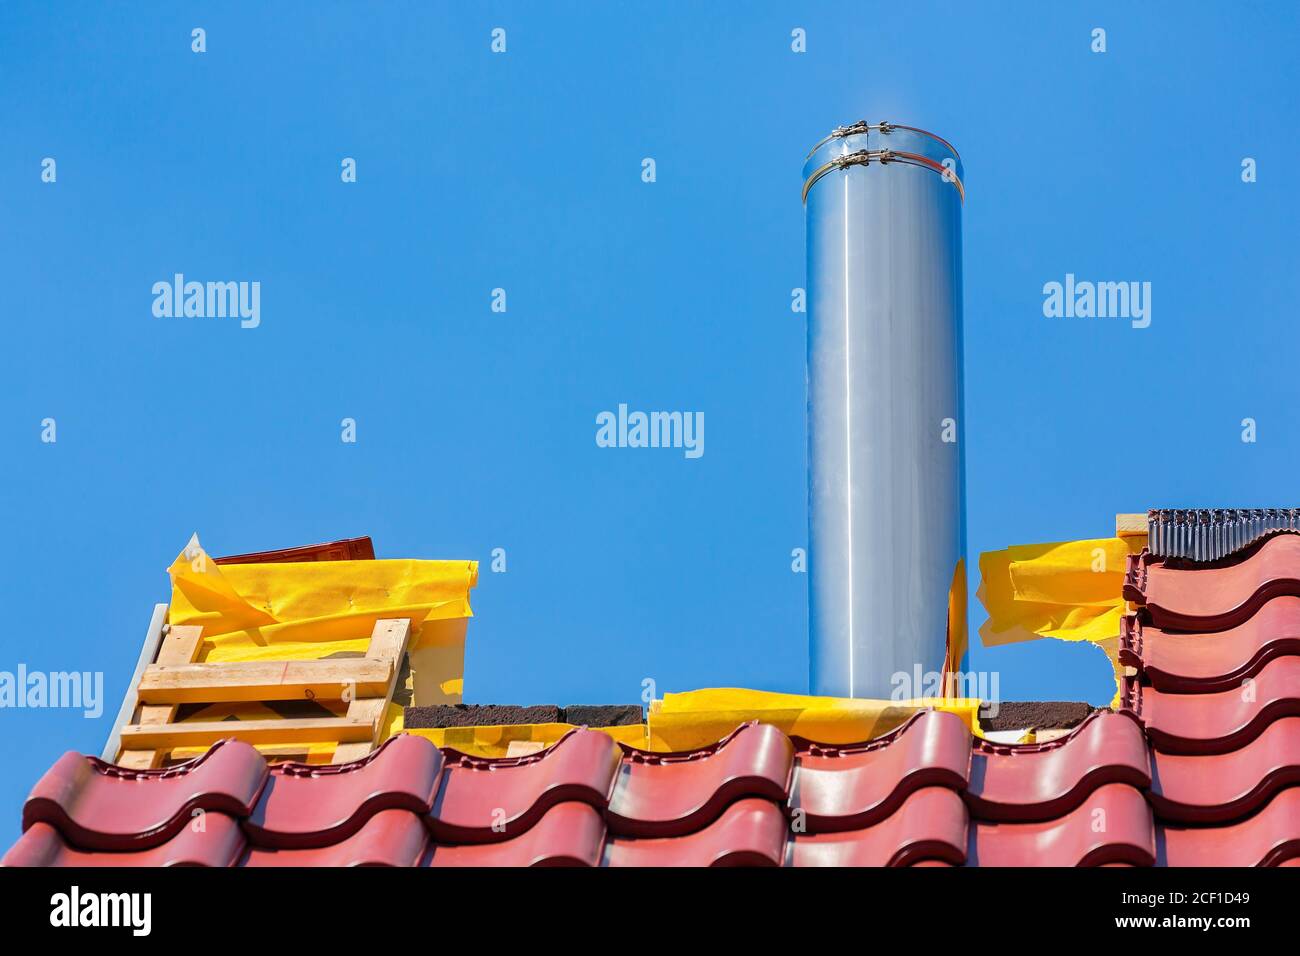 New roof with roof tiles and stainless metal chimney pipe against blue sky Stock Photo